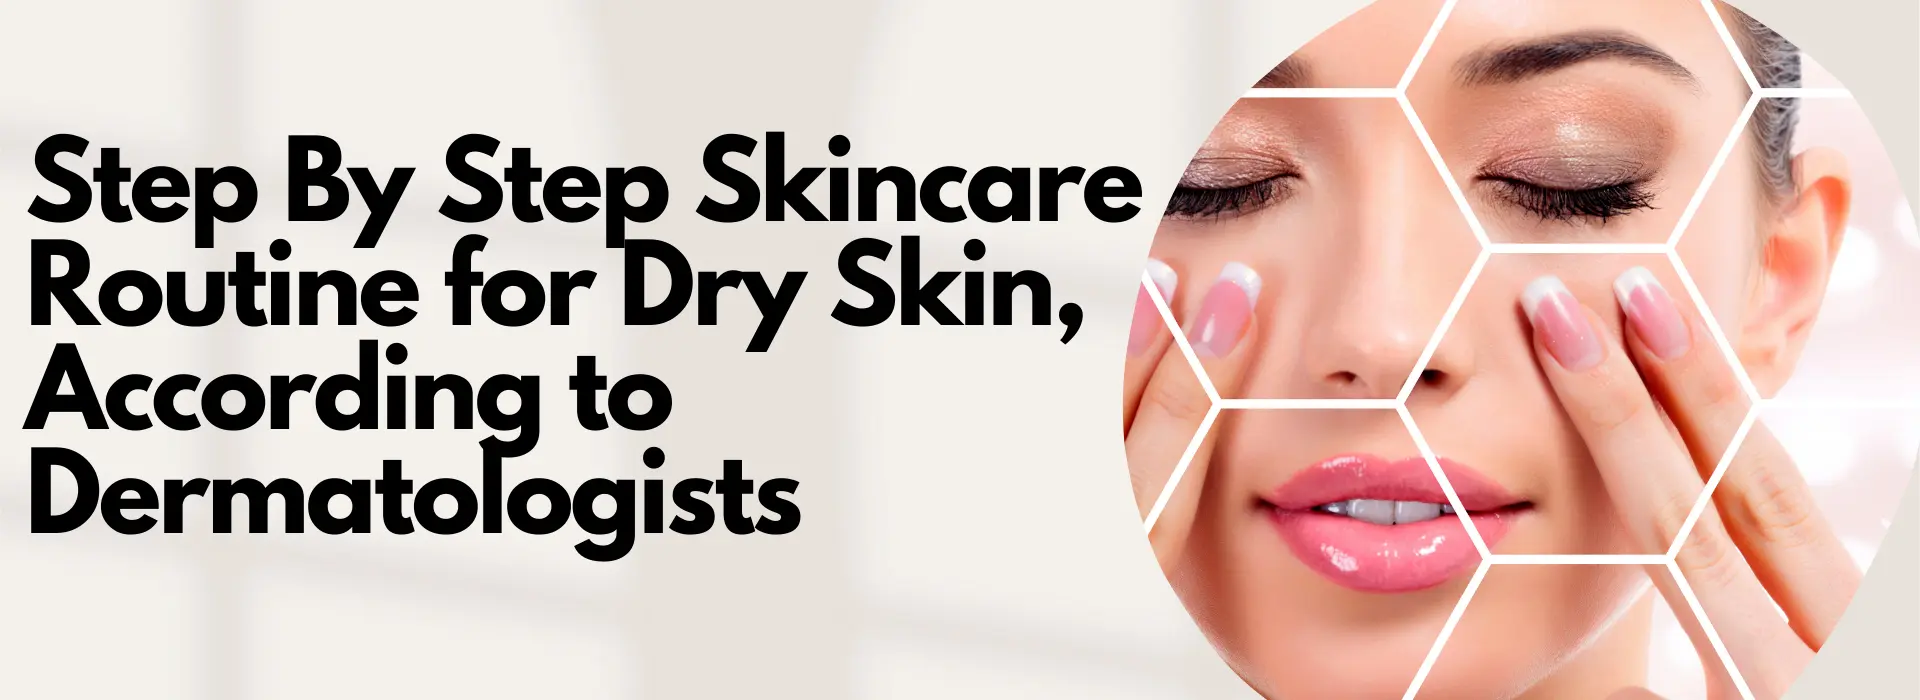 Step By Step Skincare Routine for Dry Skin According to Dermatologists